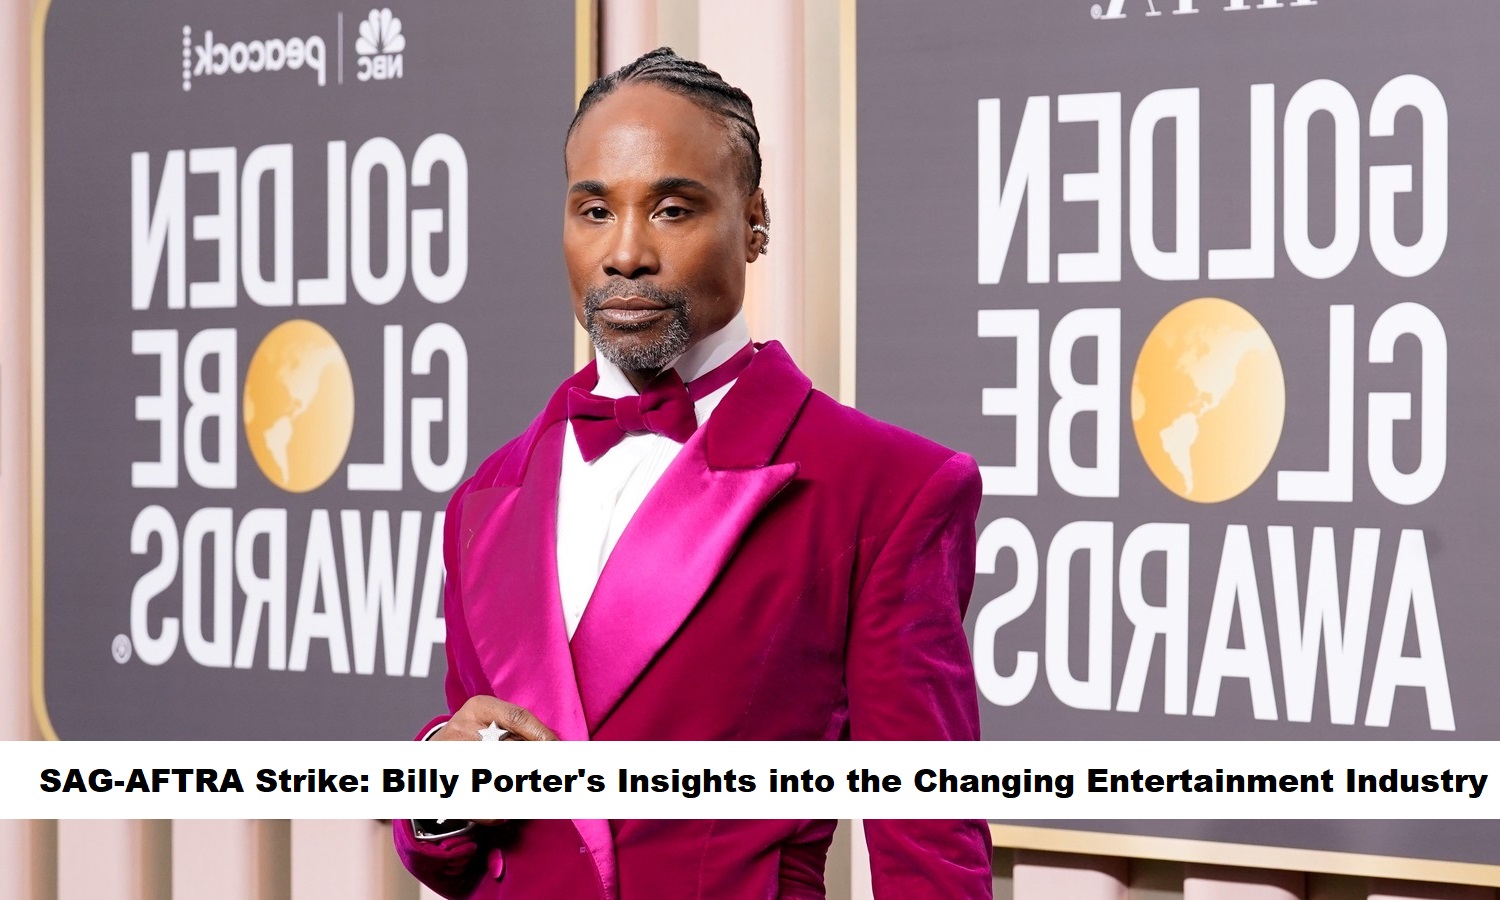 SAG-AFTRA Strike Billy Porter's Insights into the Changing Entertainment Industry